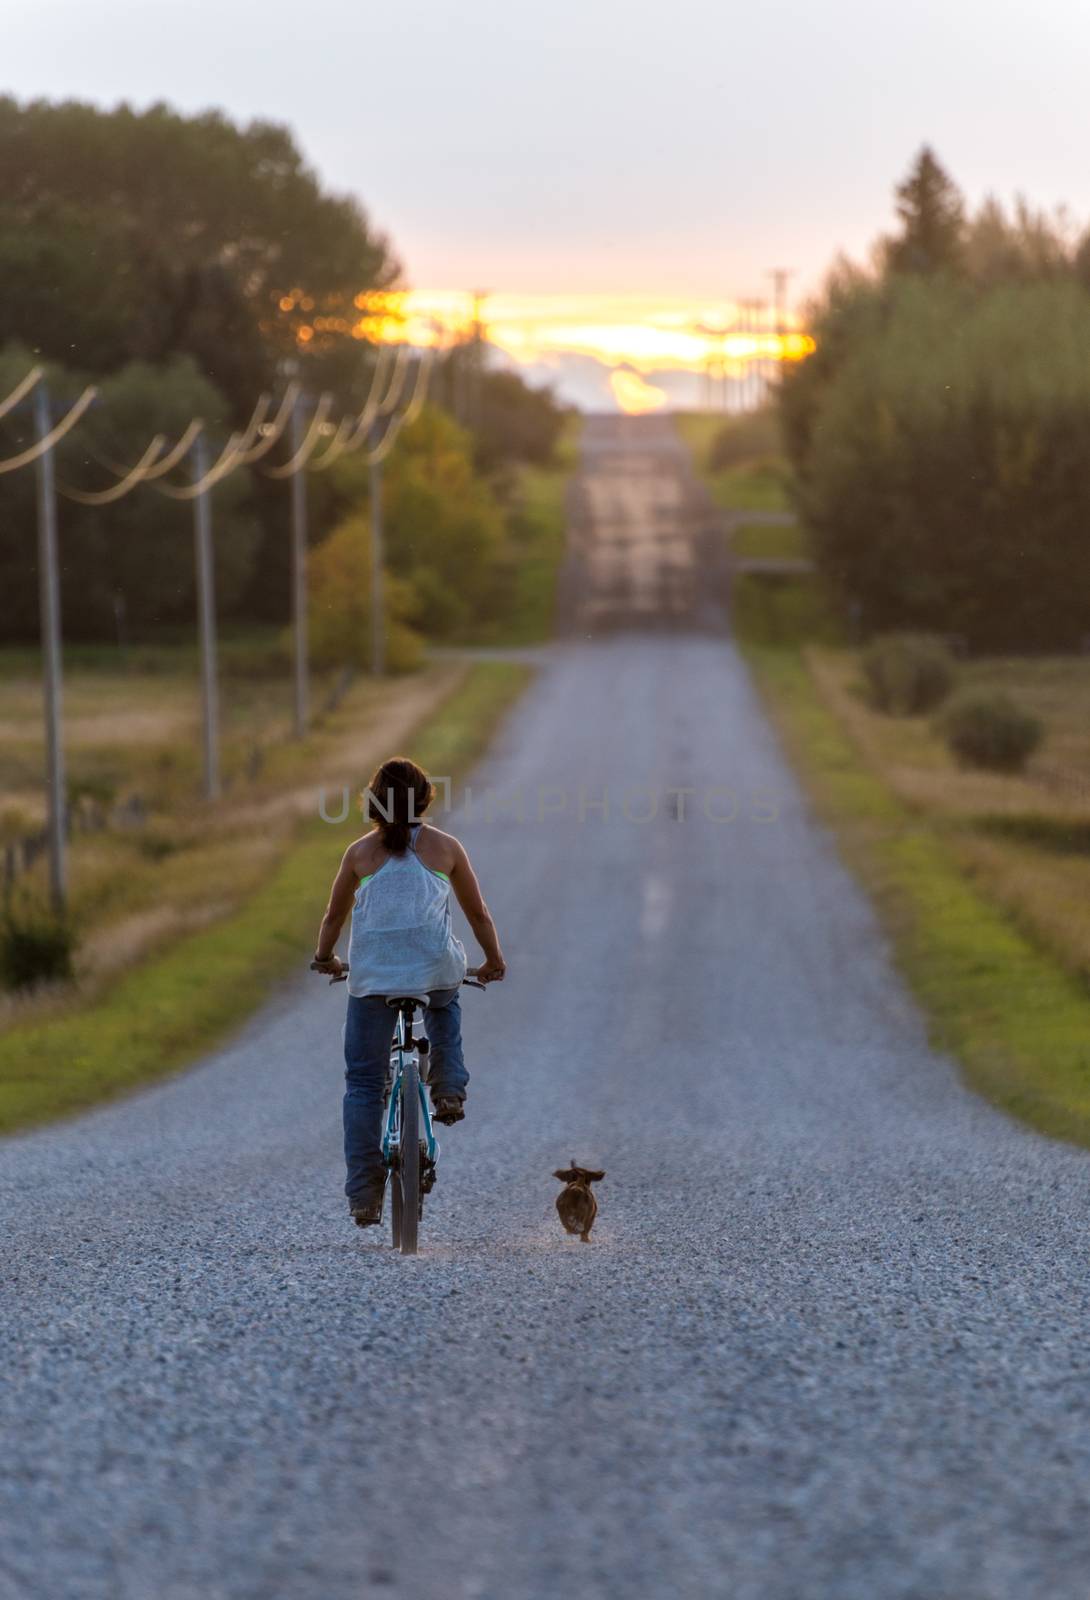 Farm girl bikes down dirt road with dog at sunset